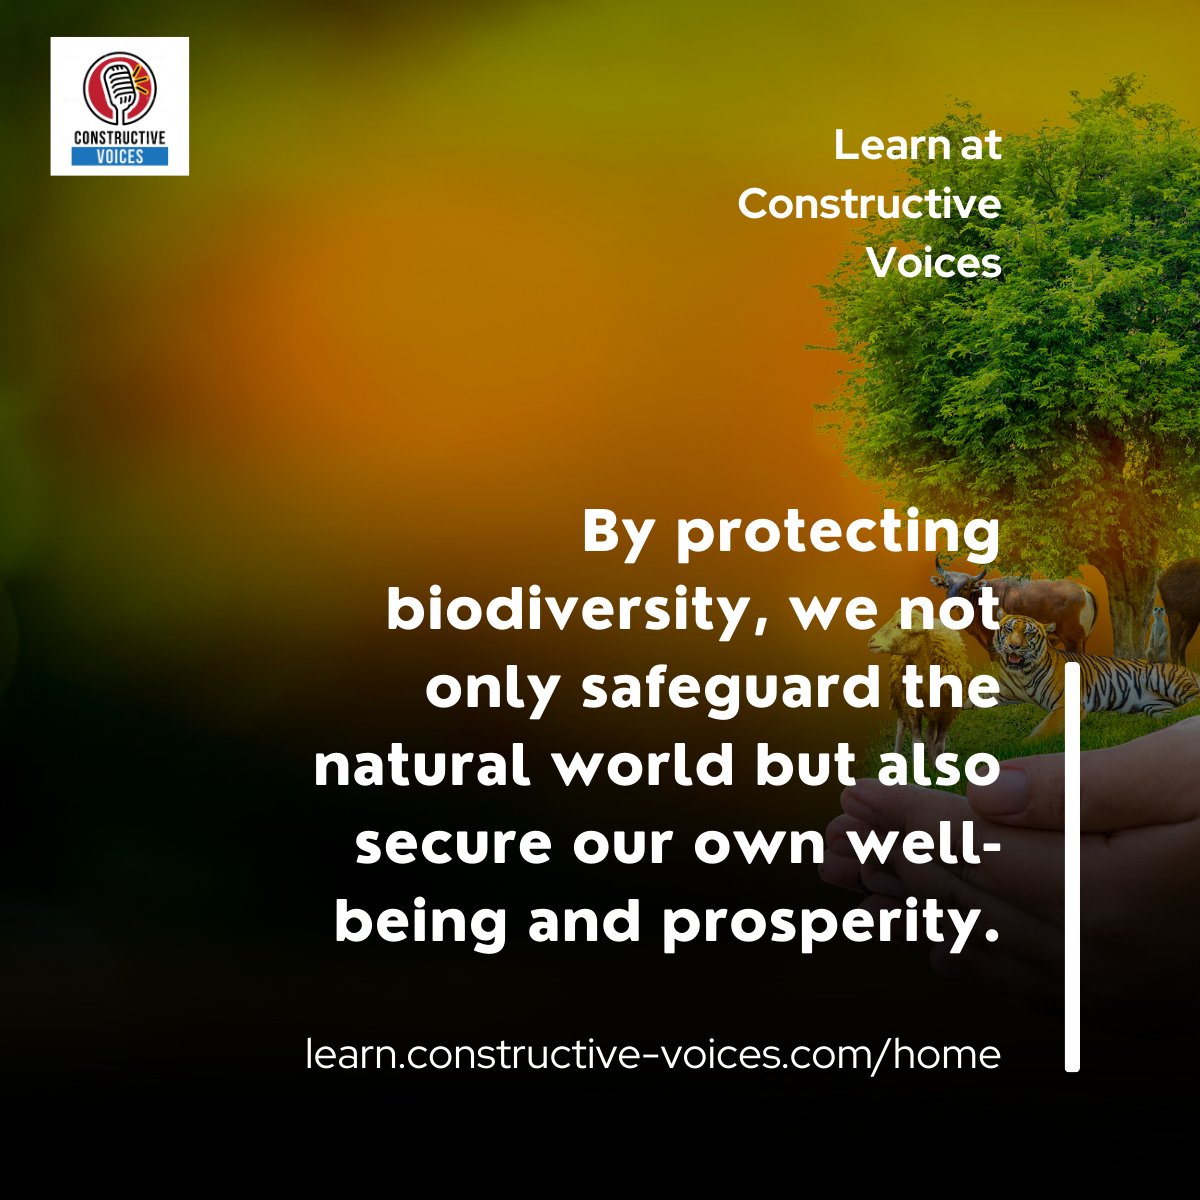 'By protecting biodiversity, we not only safeguard the natural world but also secure our own well-being and prosperity.' #biodiversity #biodiversitynetgain #training - learn.constructive-voices.com/home/